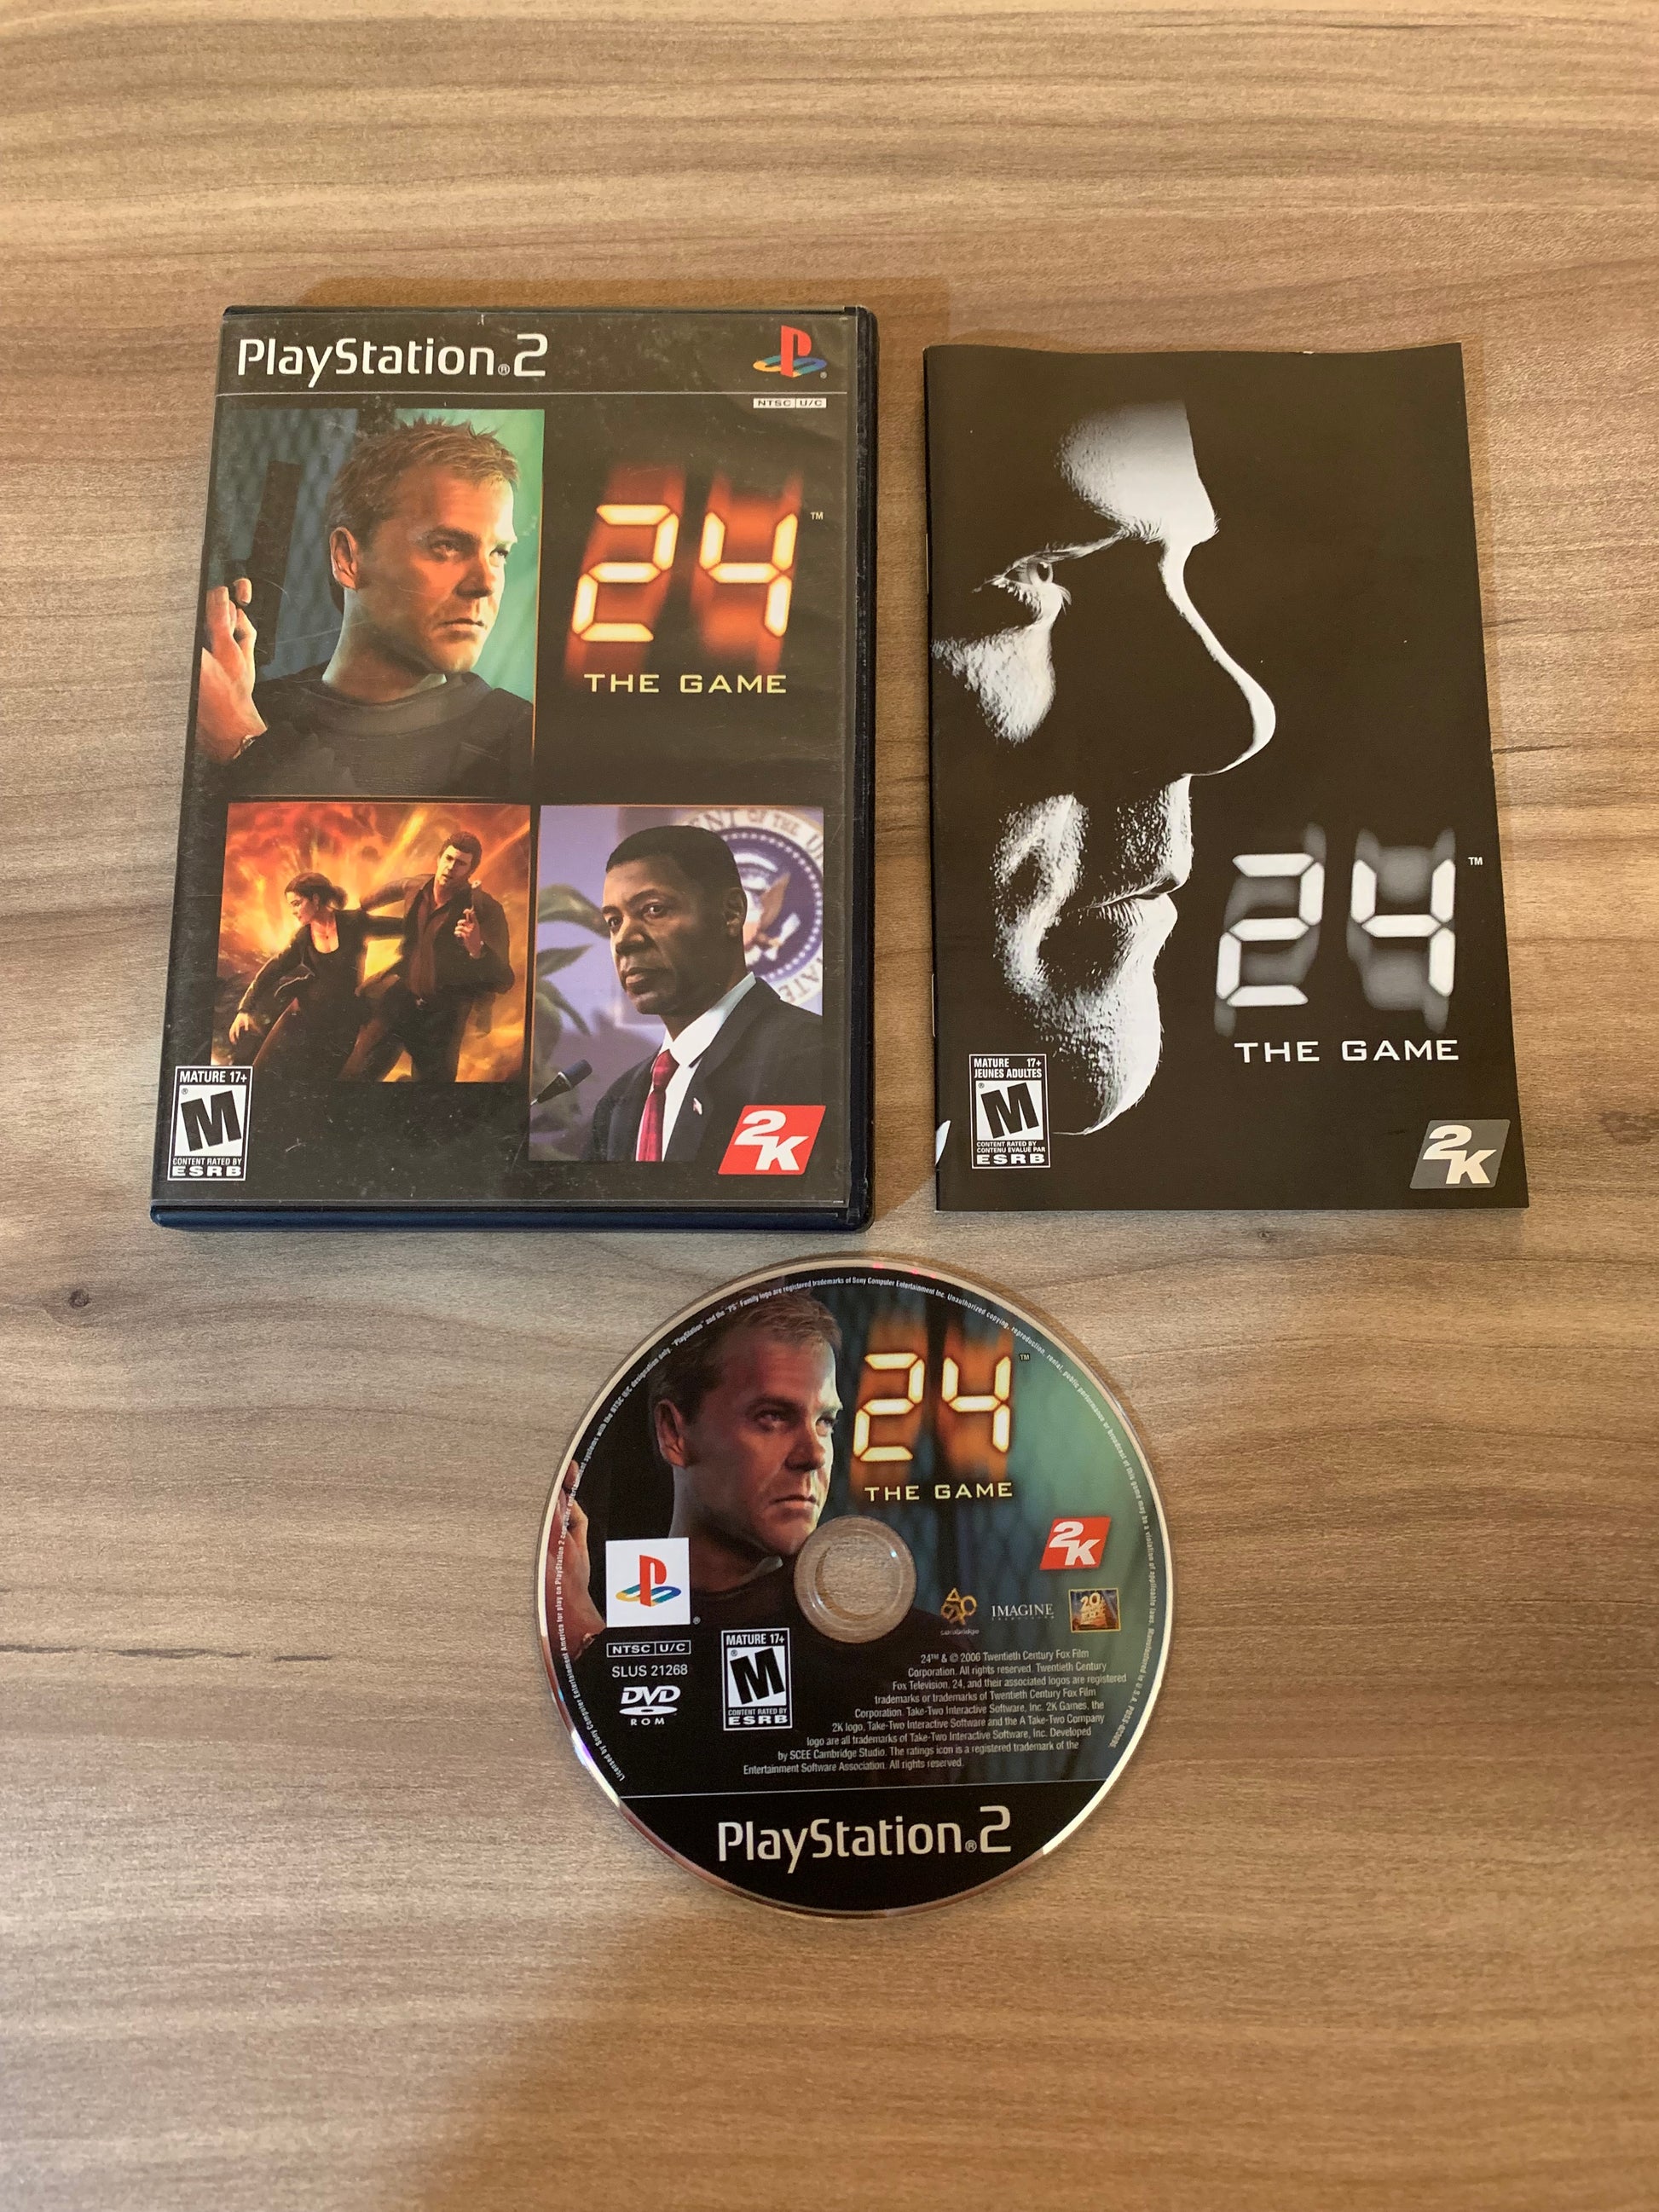 PiXEL-RETRO.COM : SONY PLAYSTATION 2 (PS2) COMPLET CIB BOX MANUAL GAME NTSC 24 THE GAME